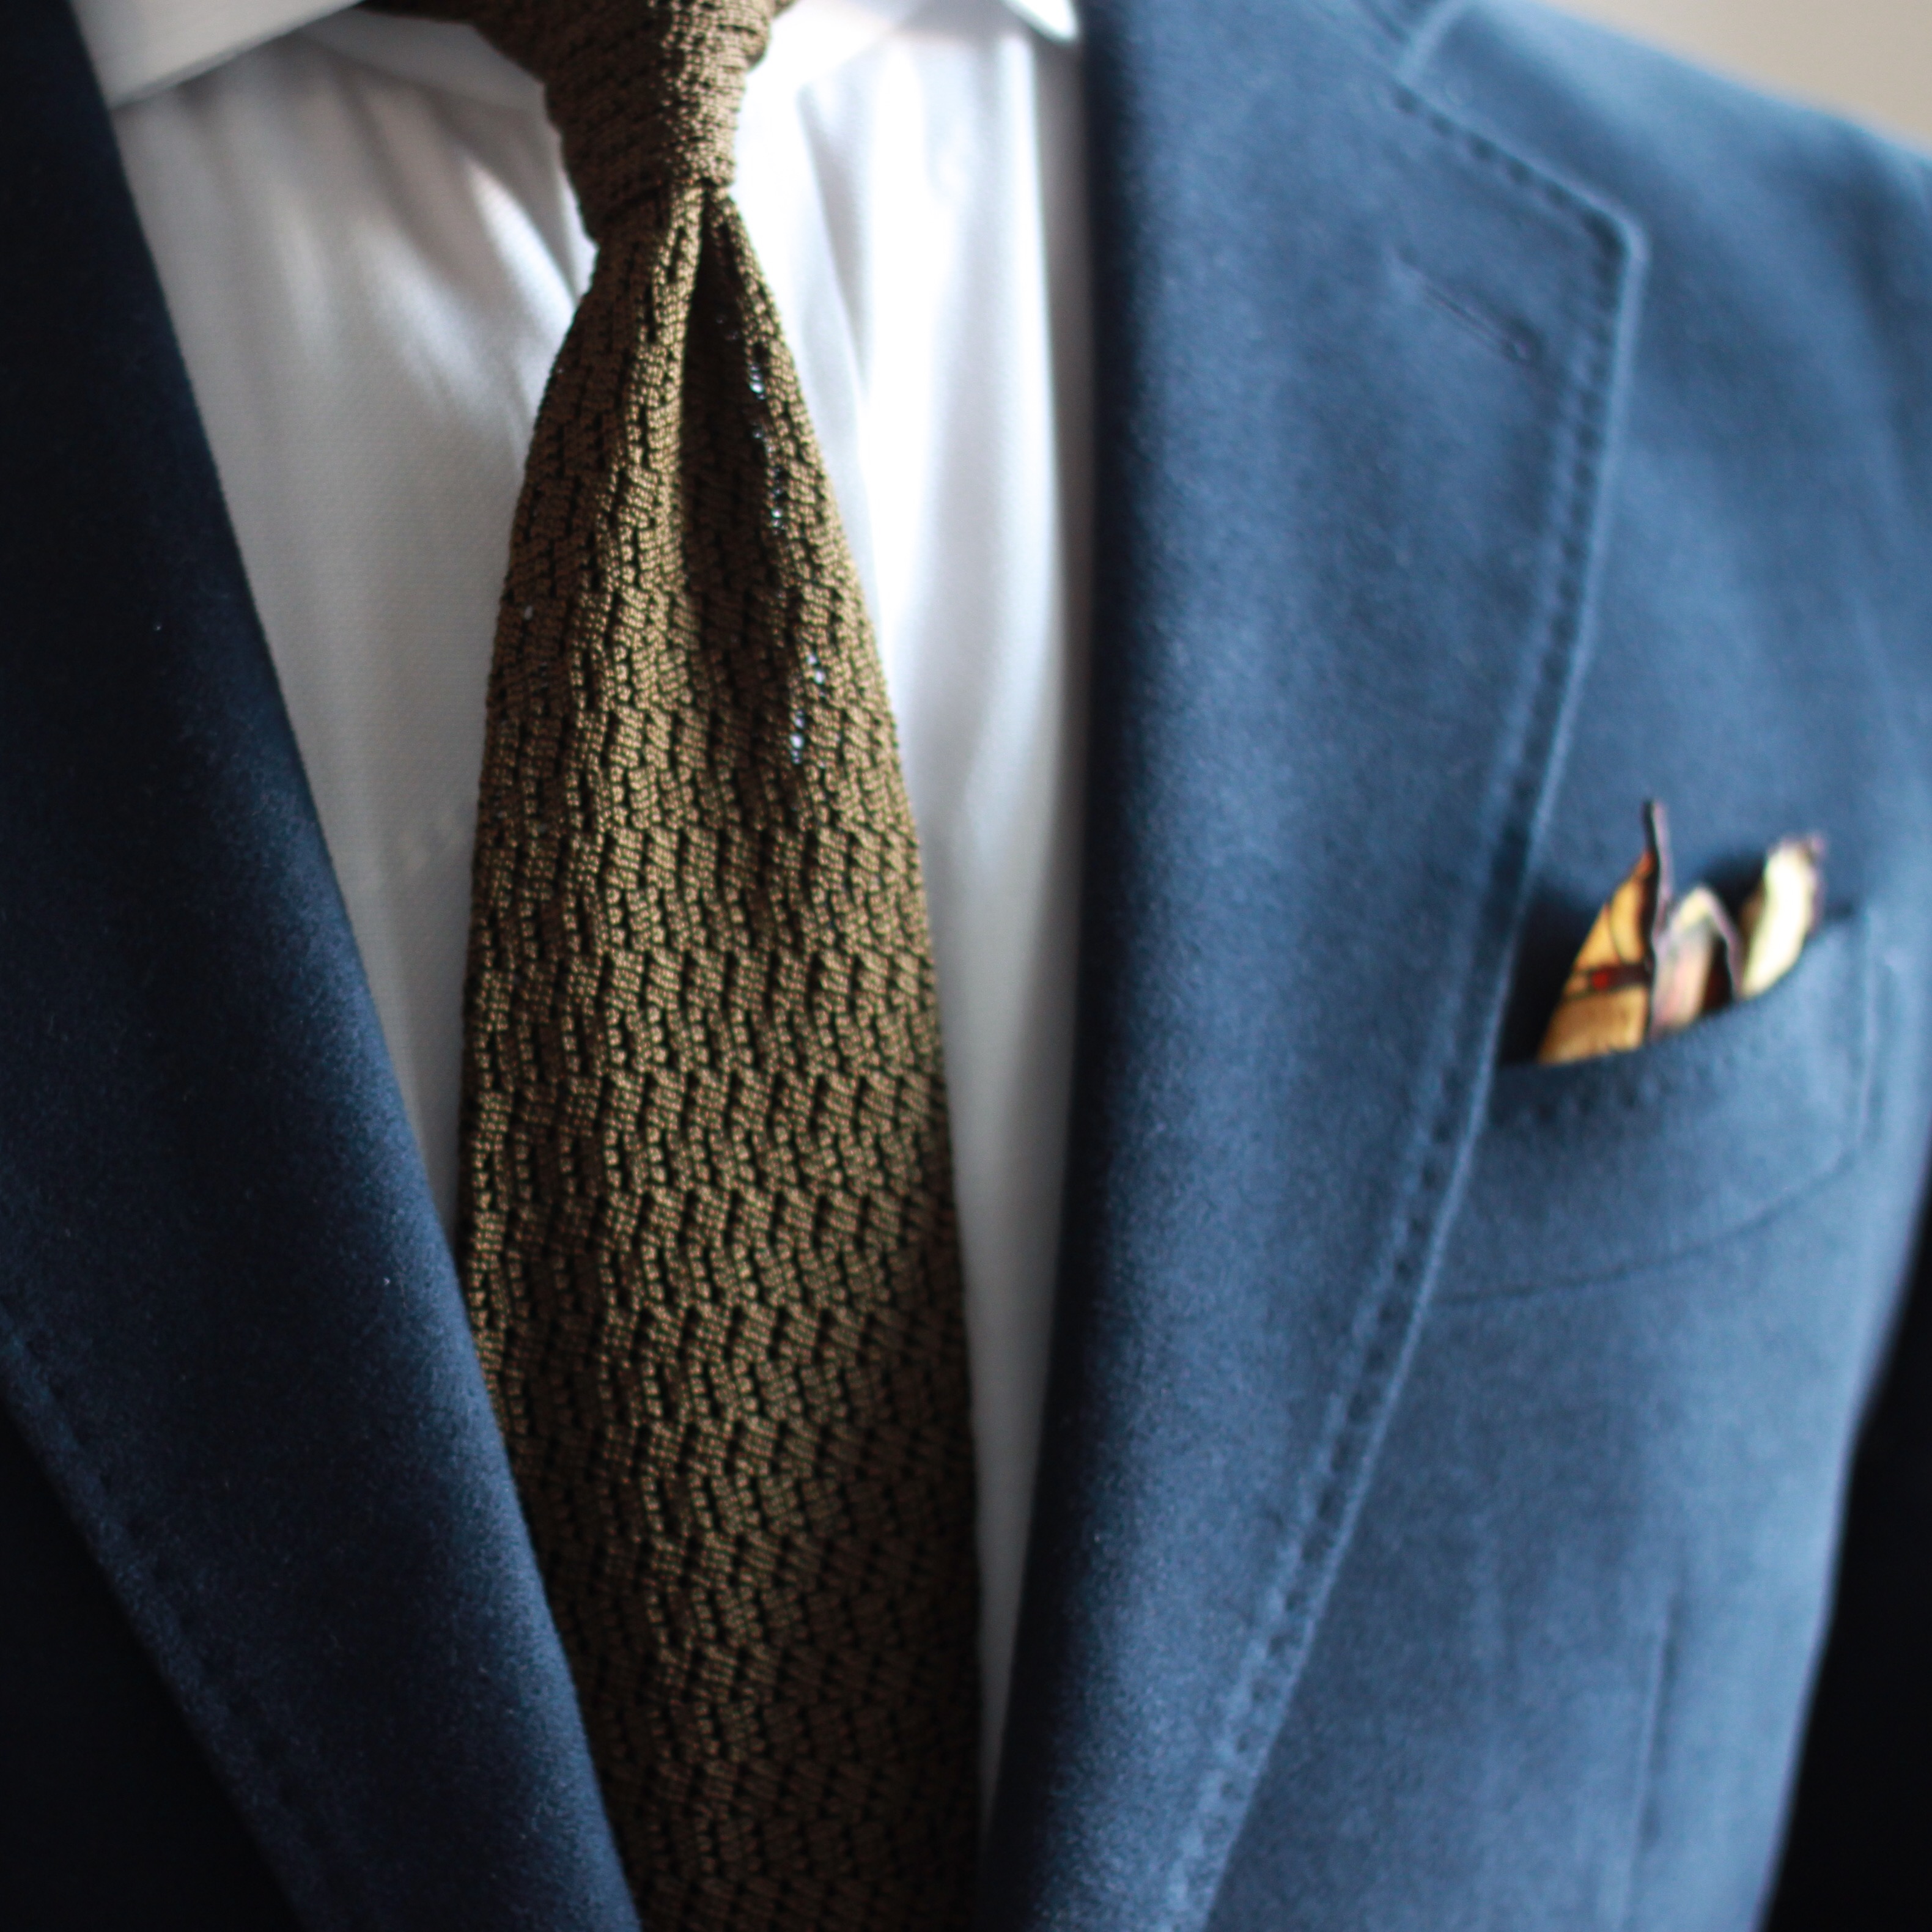 Reviewed: Oxford Rowe knit ties - After the Suit